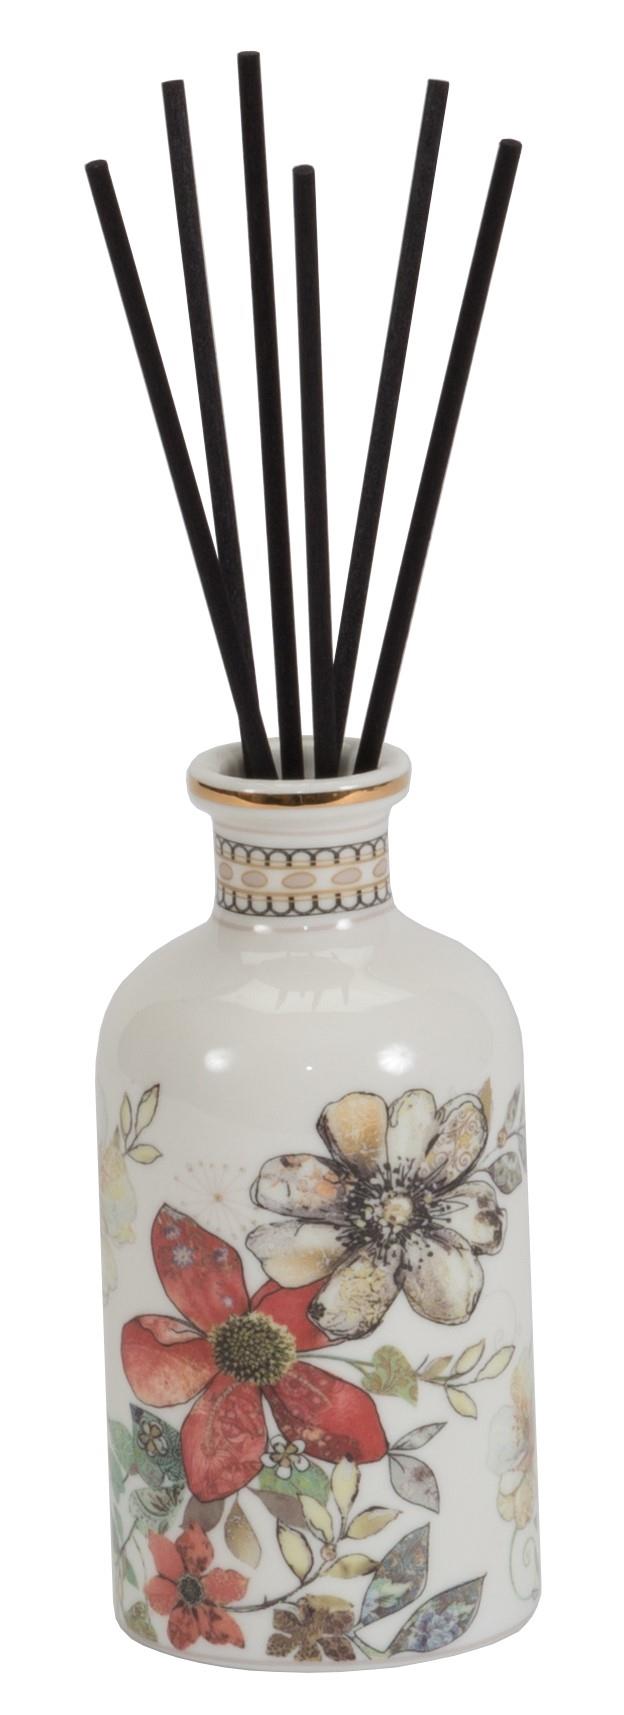 Special Offer - Hummingbird Reed Diffuser With Free Matching Notepad